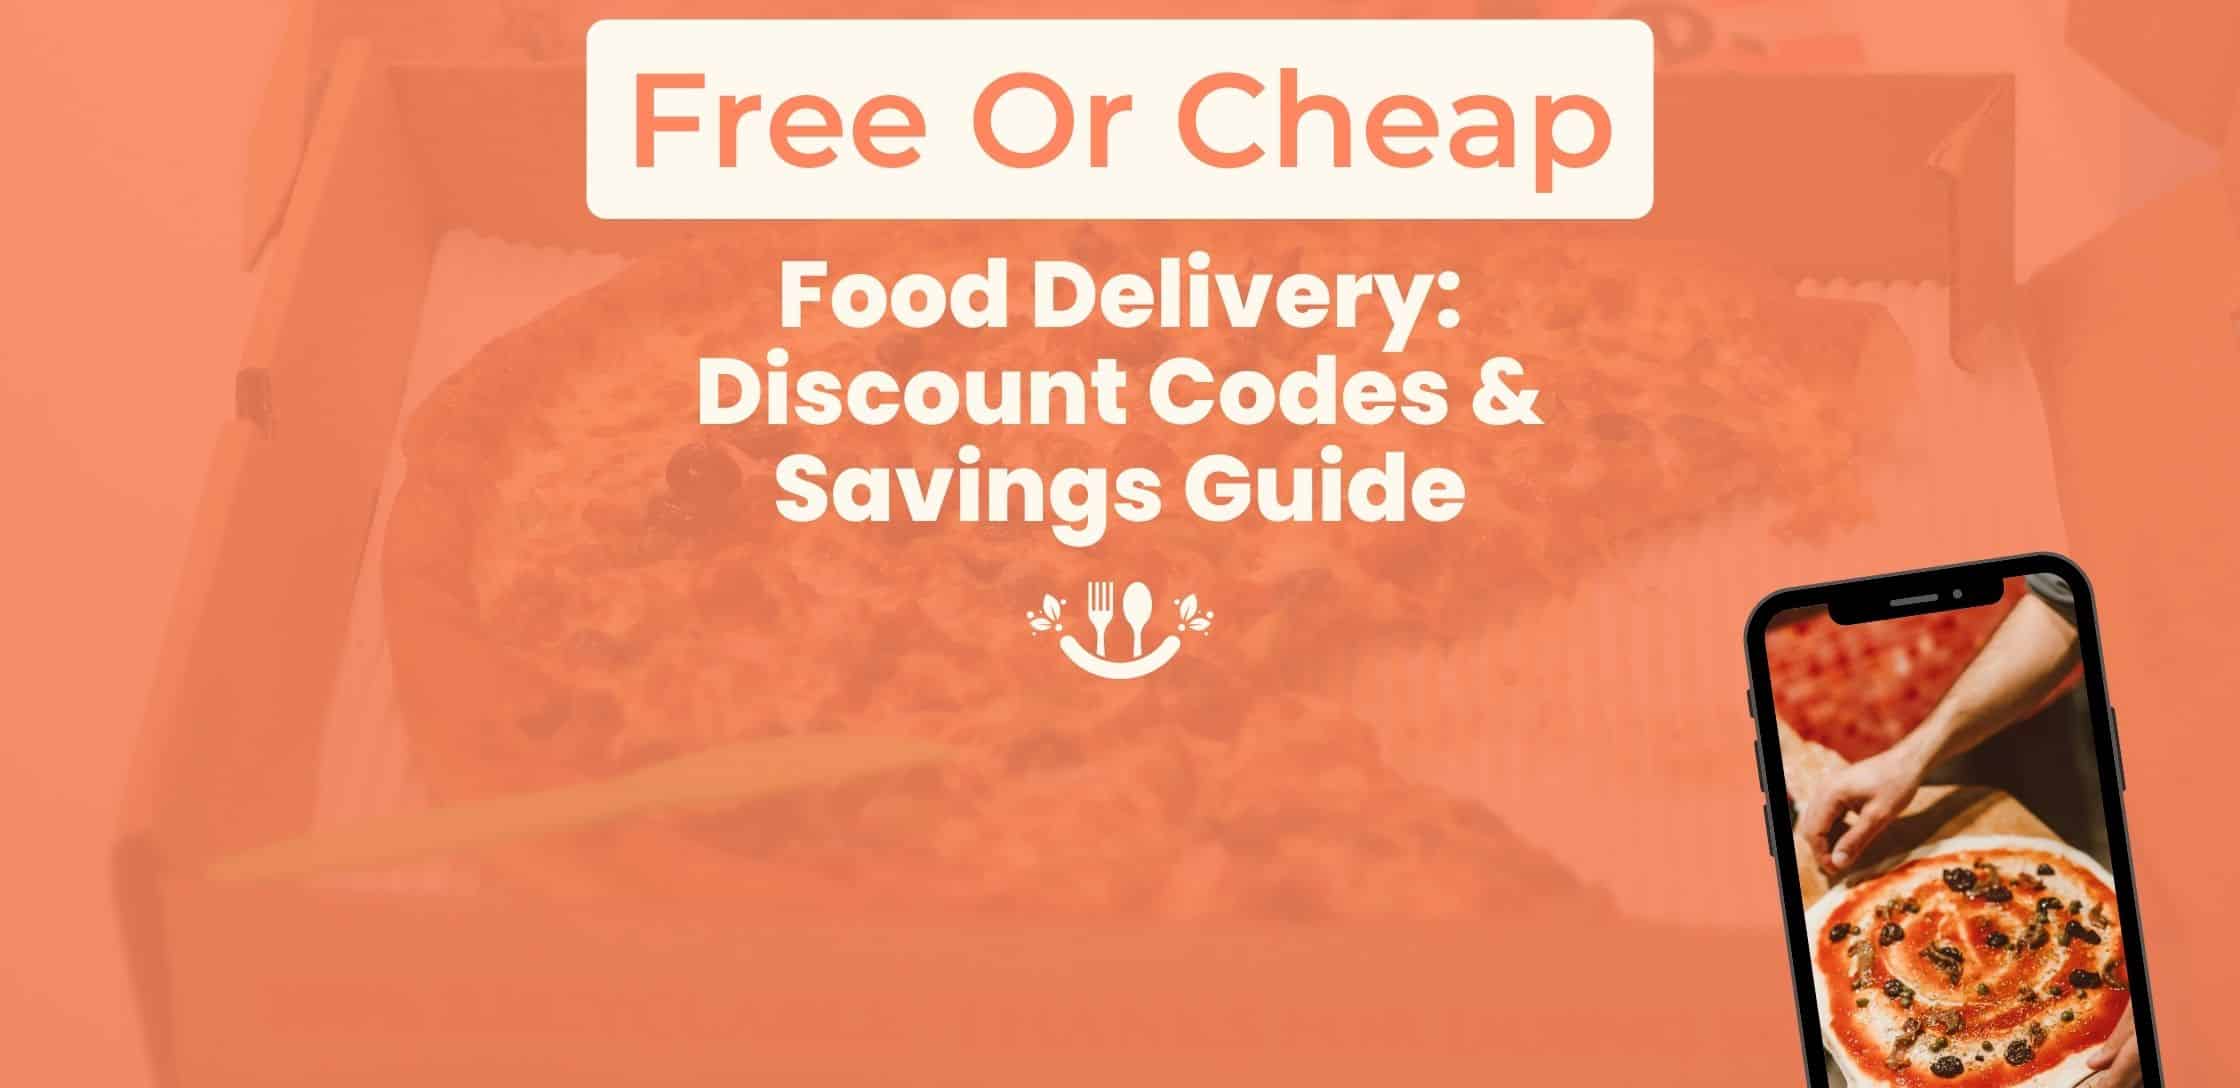 https://yofreesamples.com/wp-content/uploads/2022/07/free-food-delivery-discount-codes.jpg